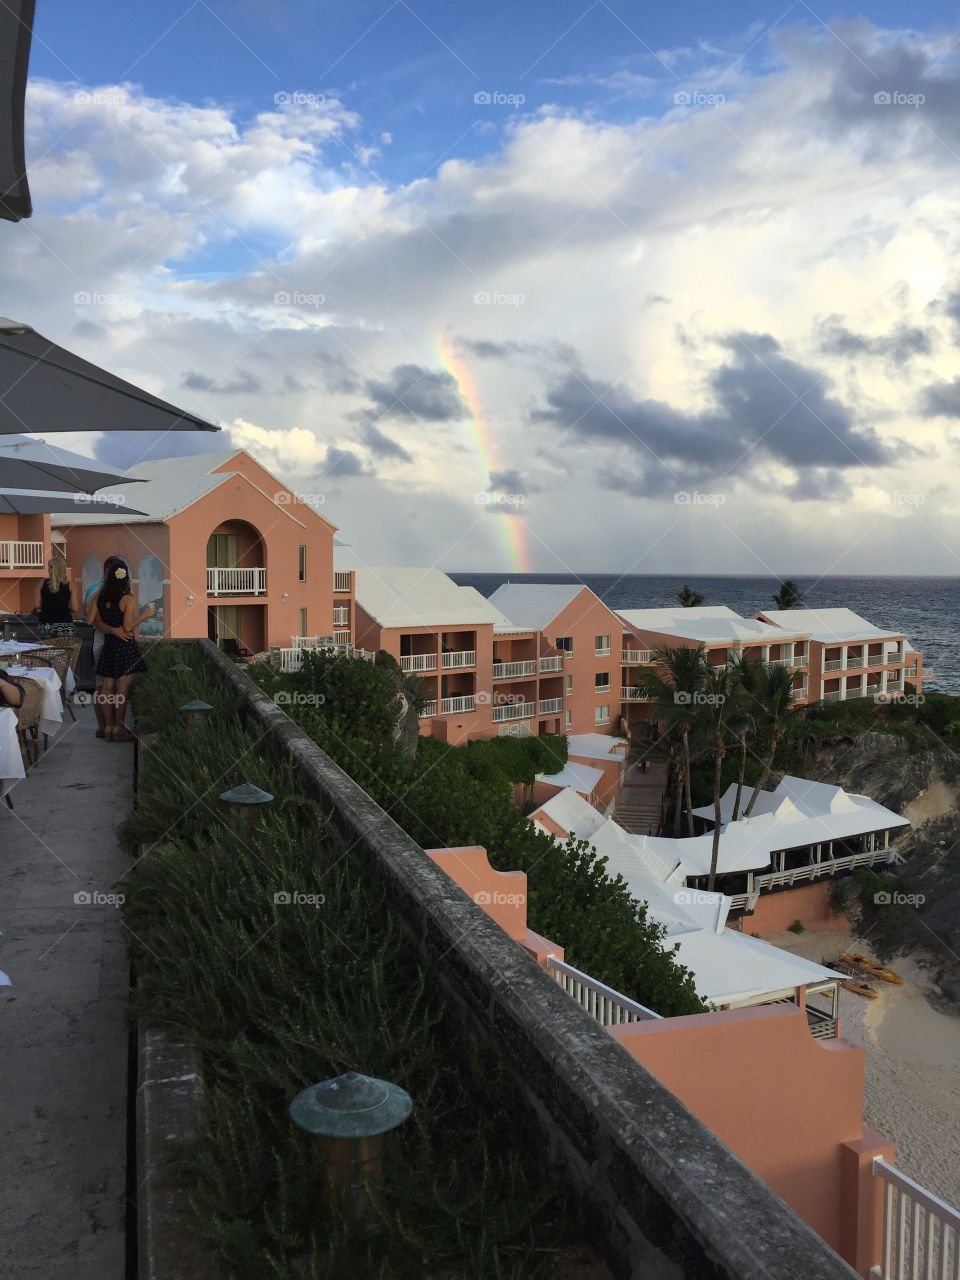 A Rainbow for the Resort 